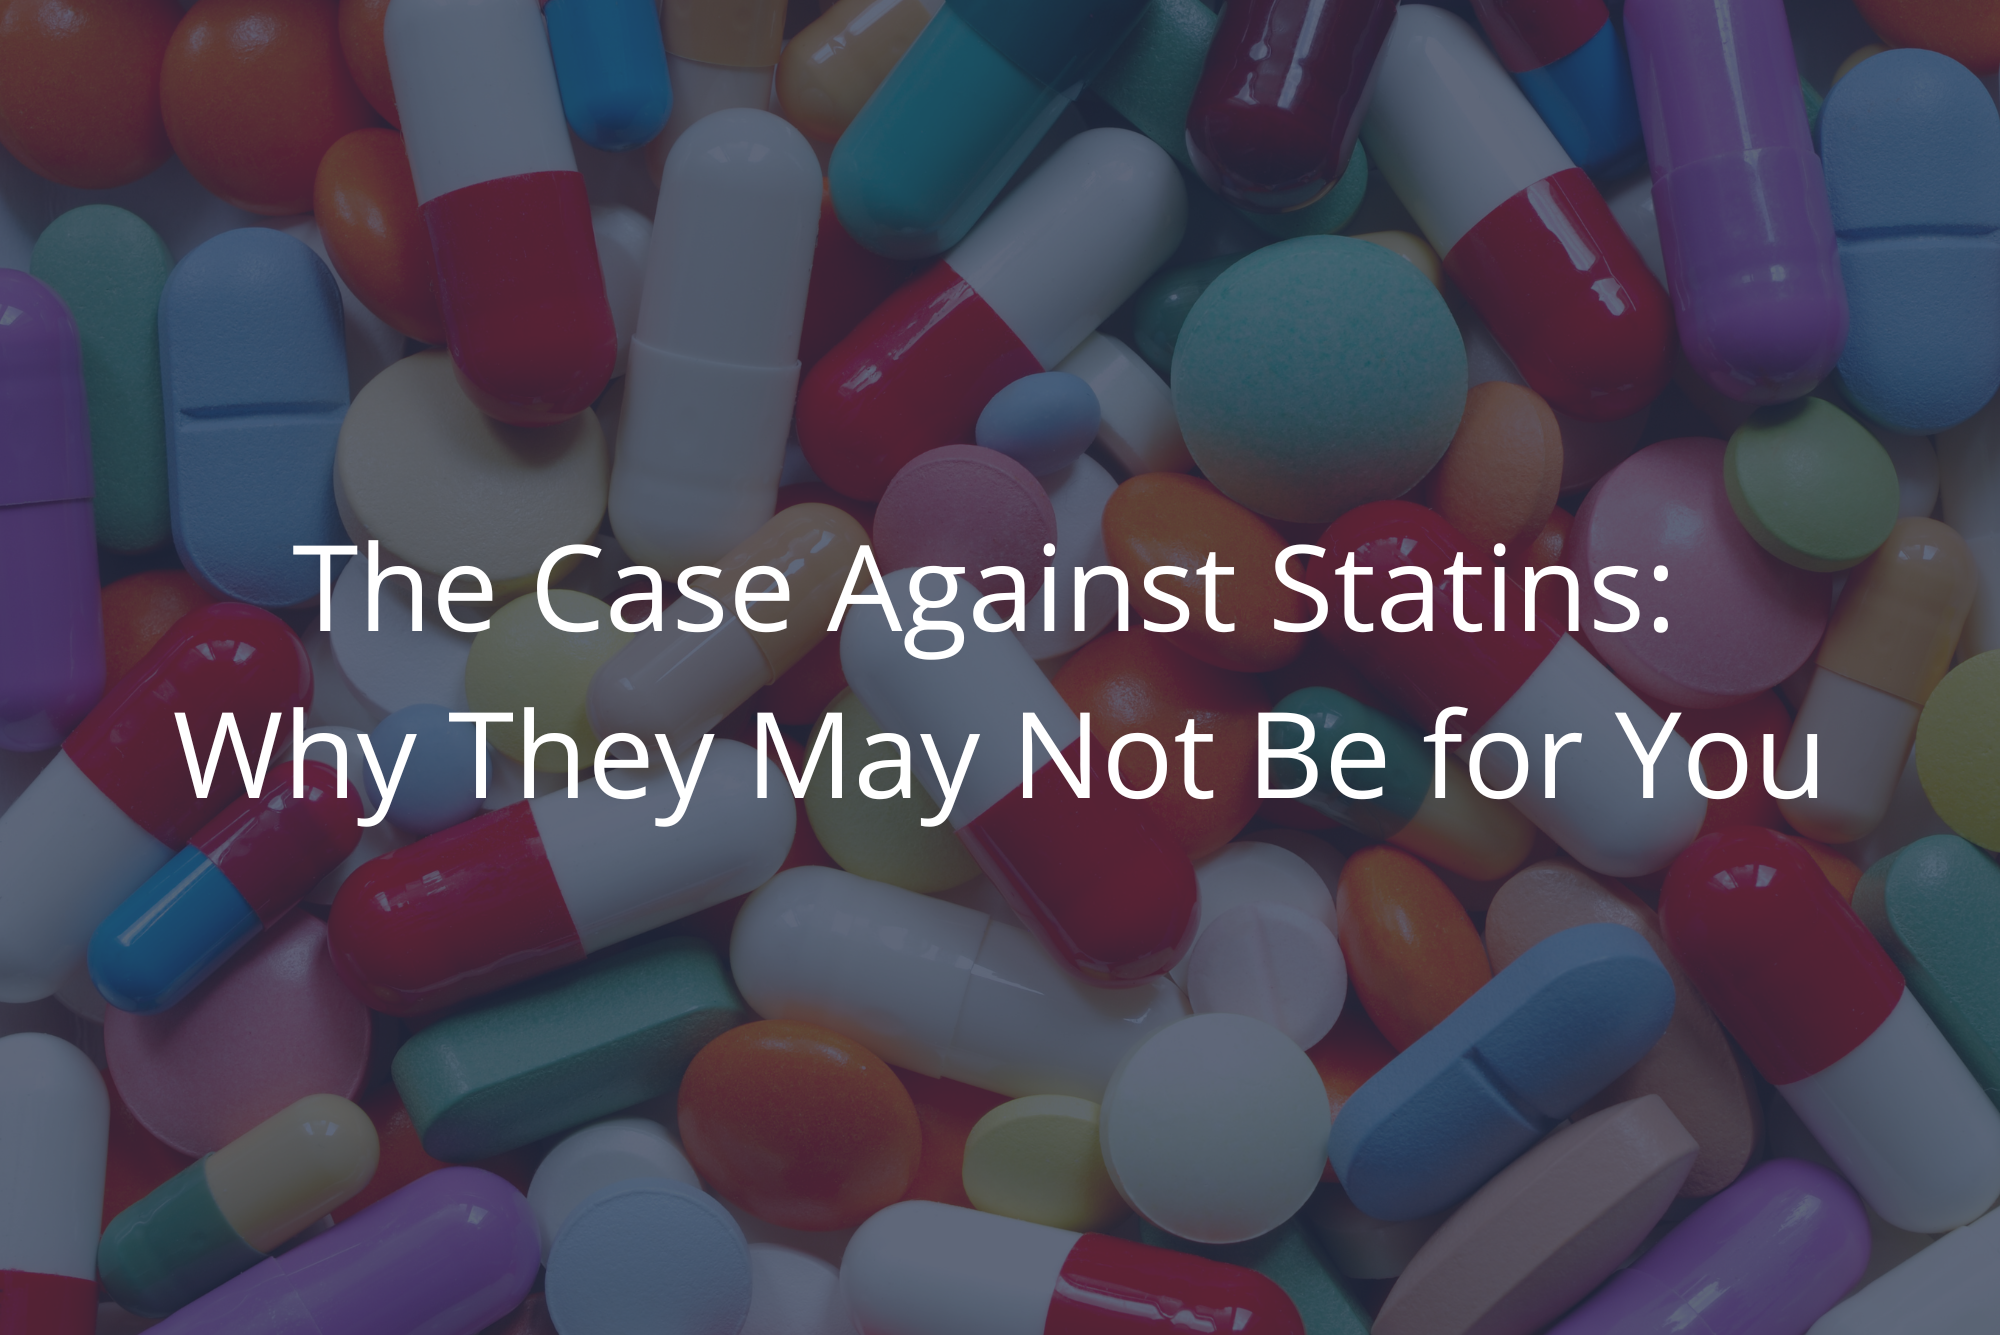 A pile of assorted statins, representing the case against statins with a dark overlay.